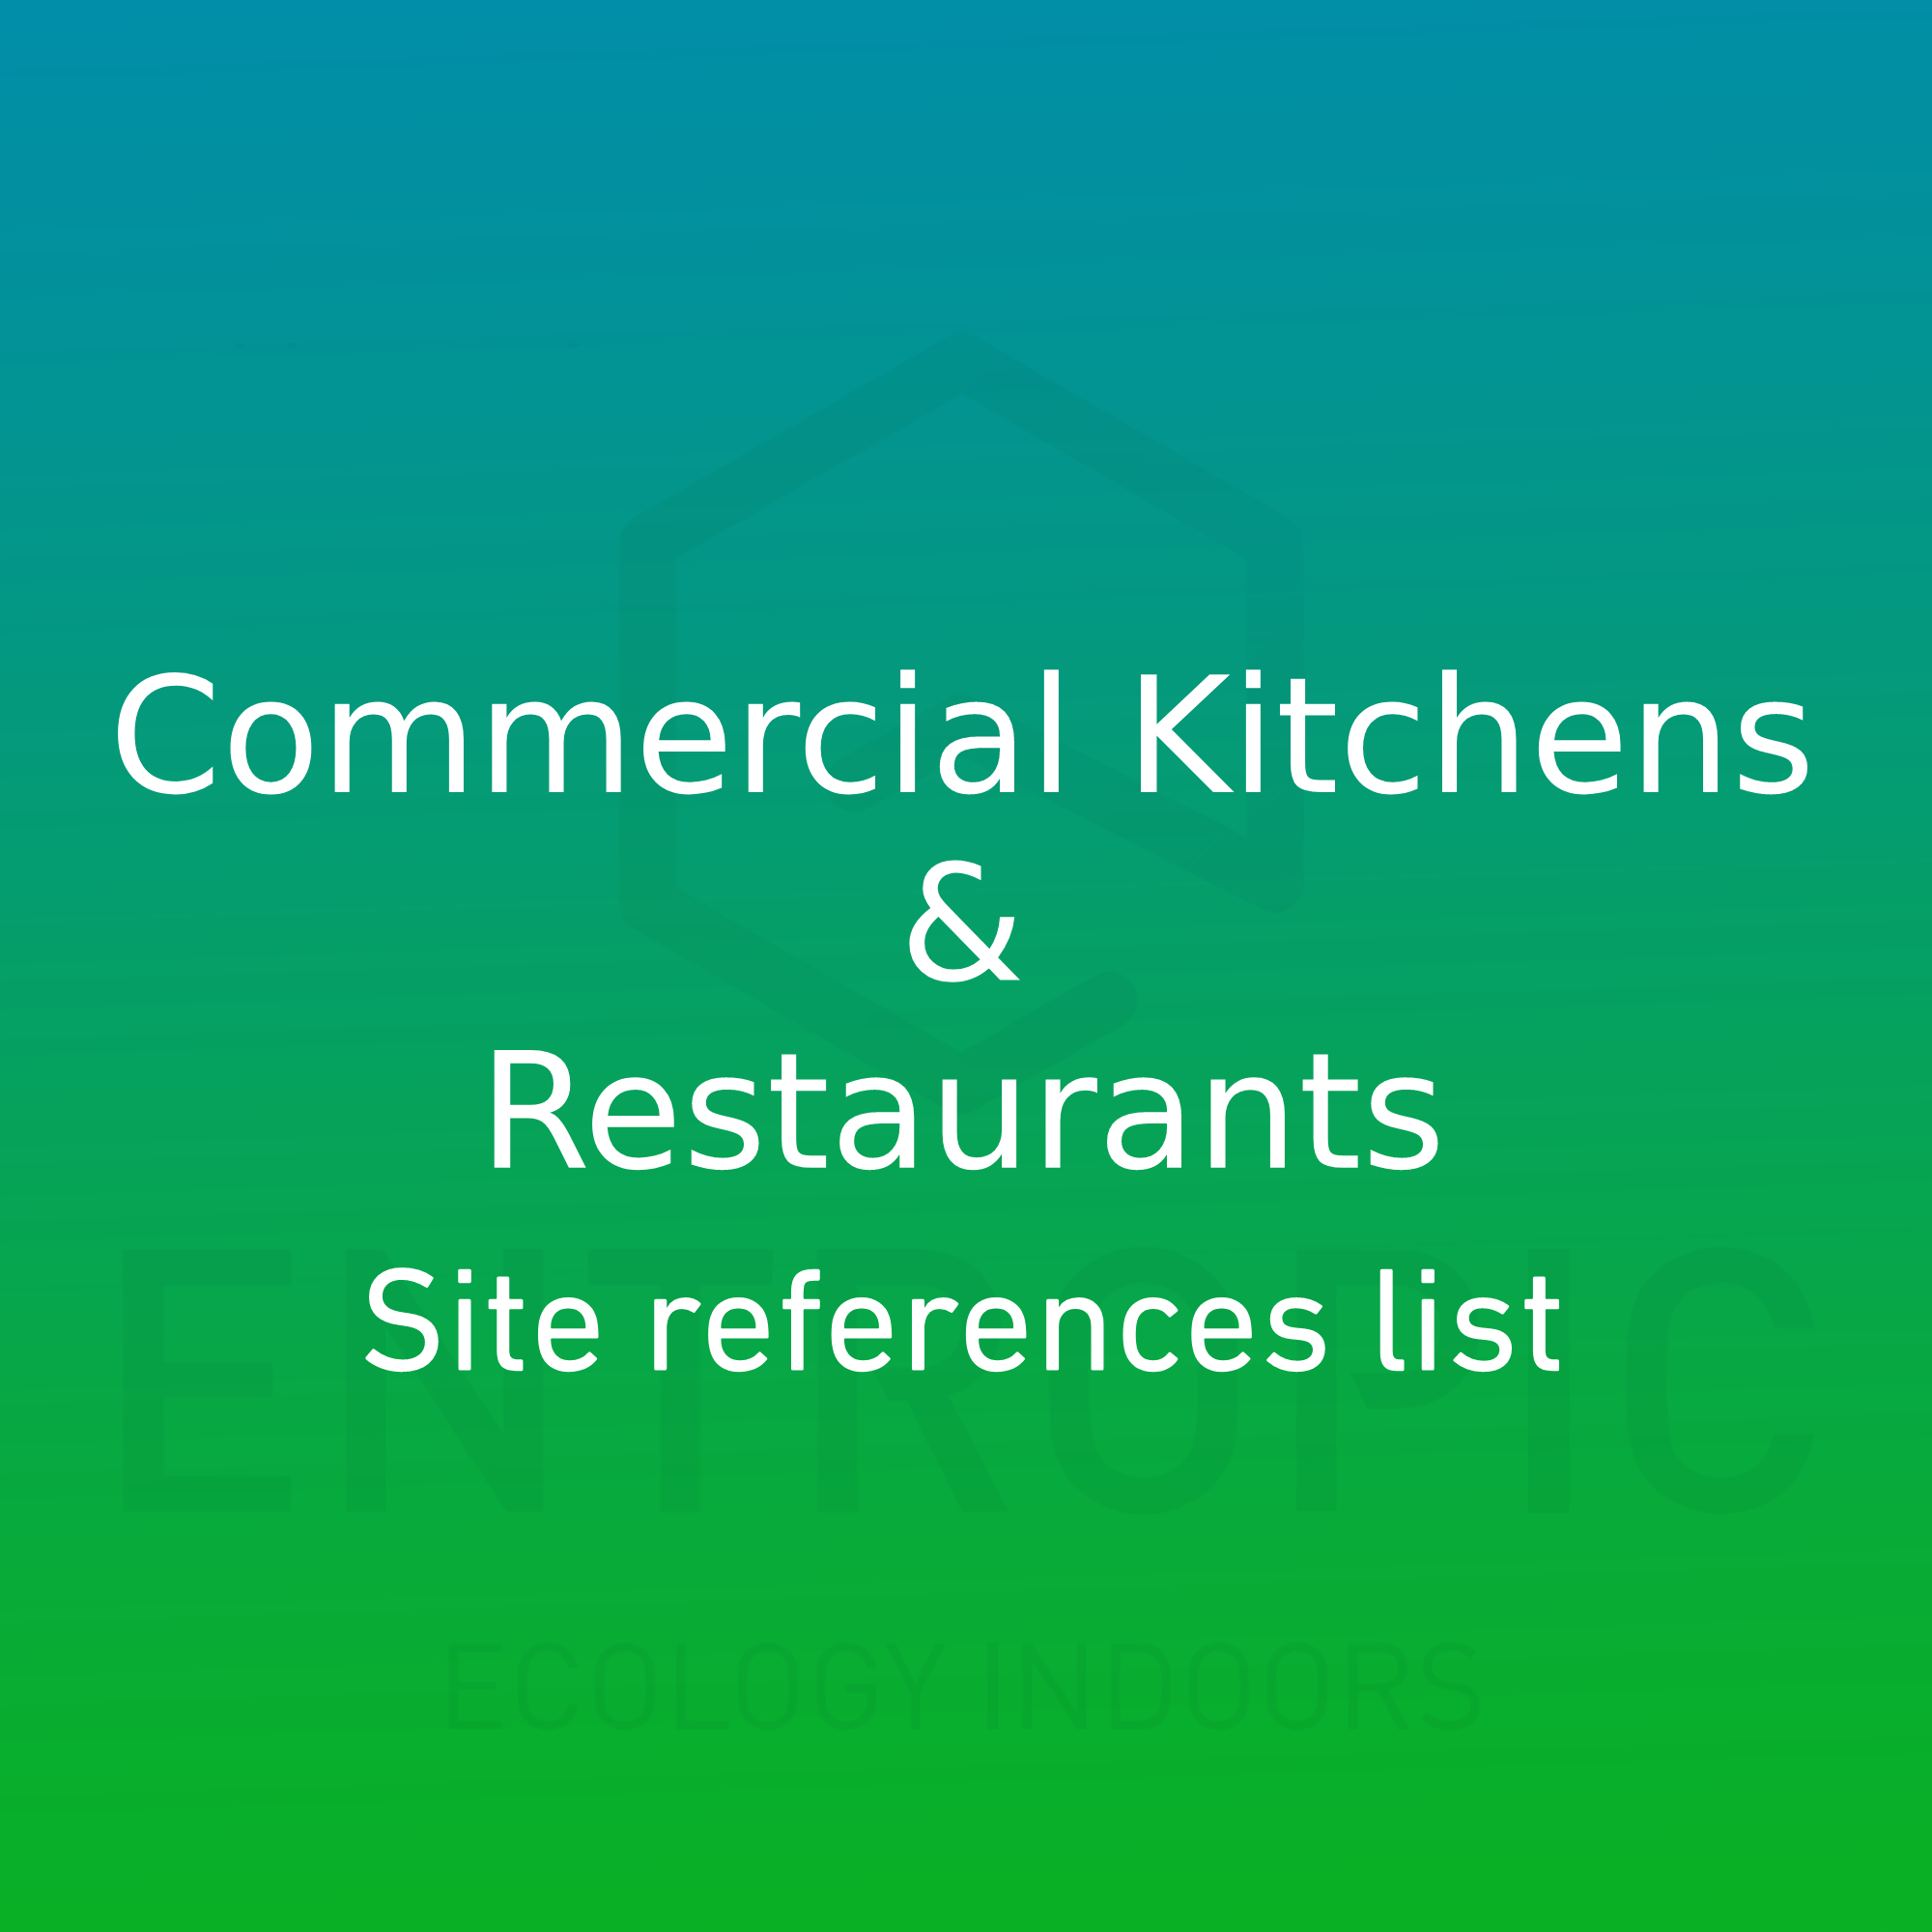 kitchens-site-reference-list